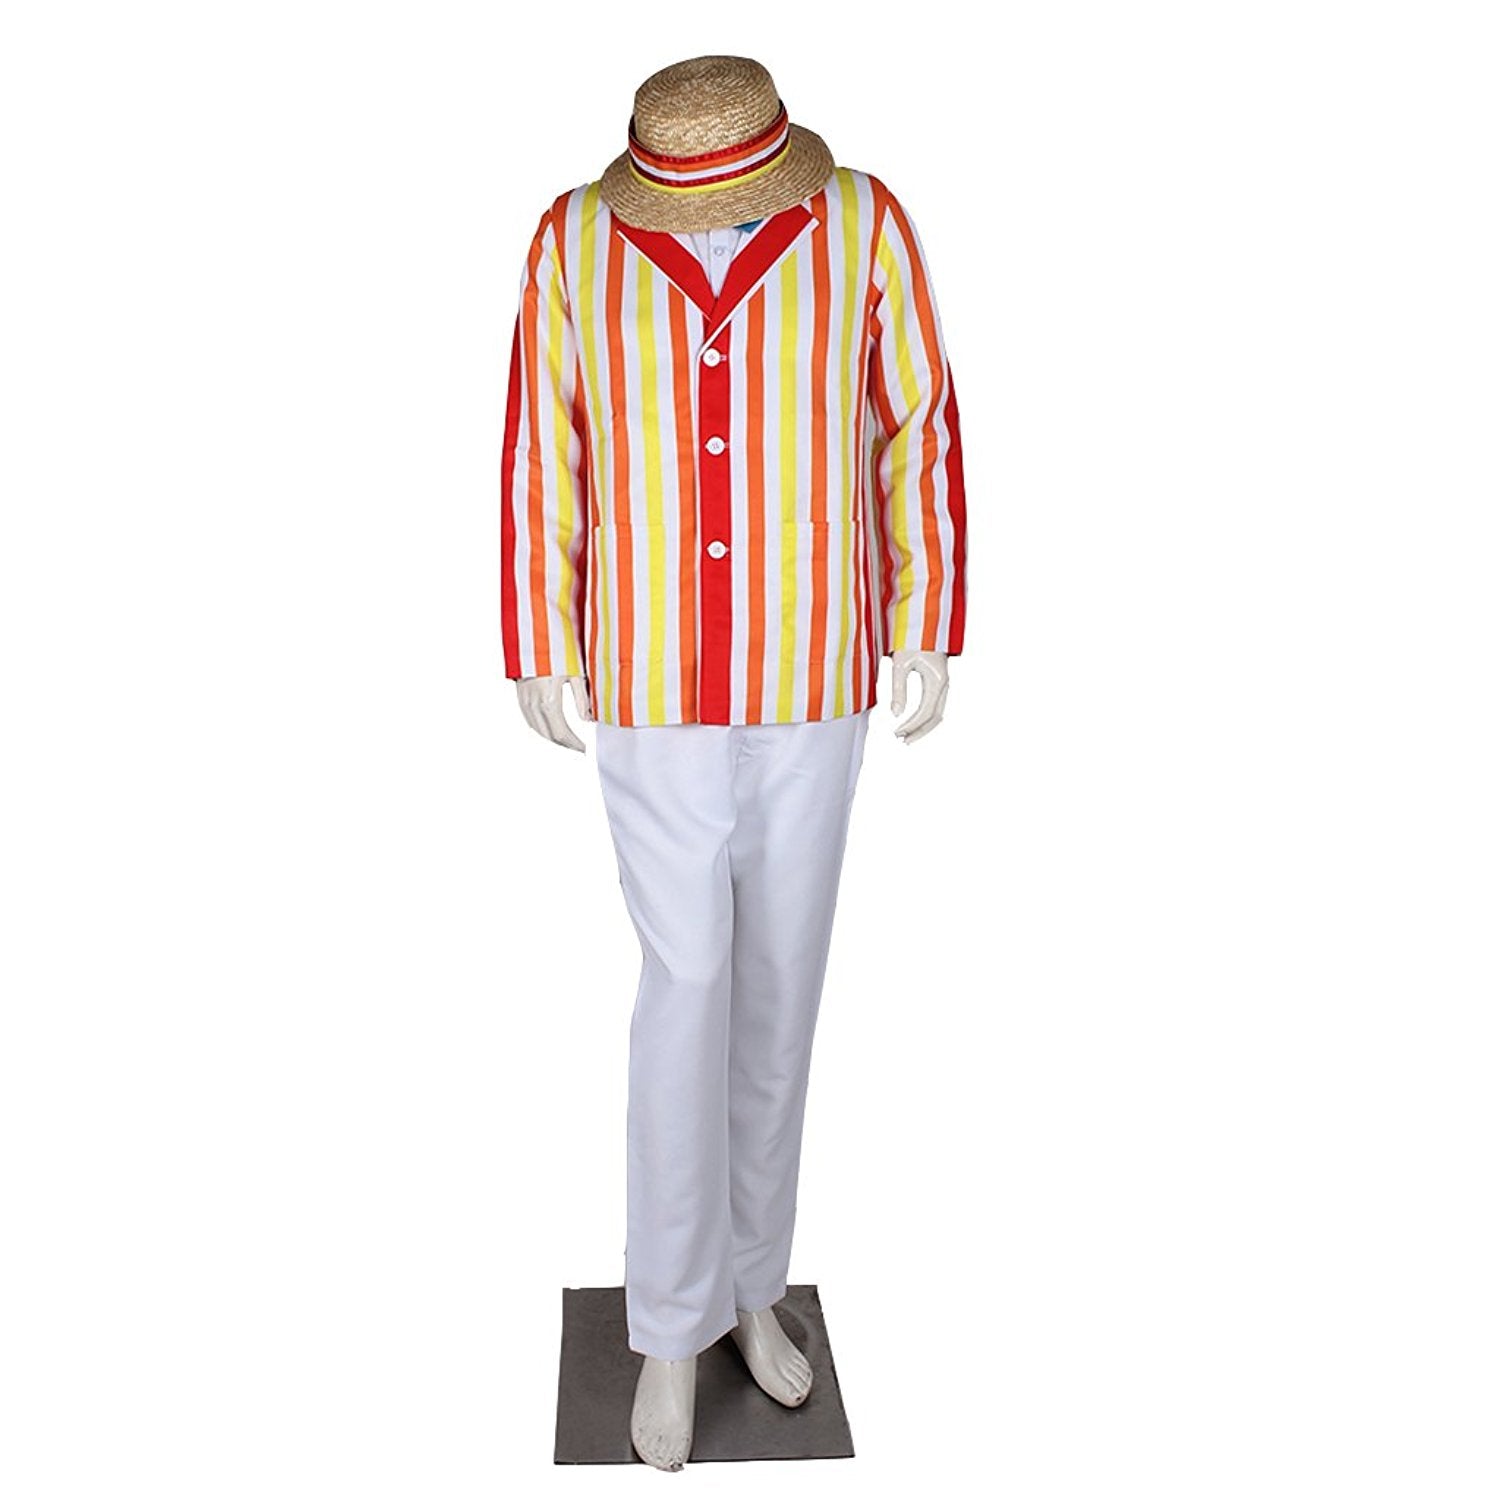 Mary Poppins Bert Cosplay Costume Outfit